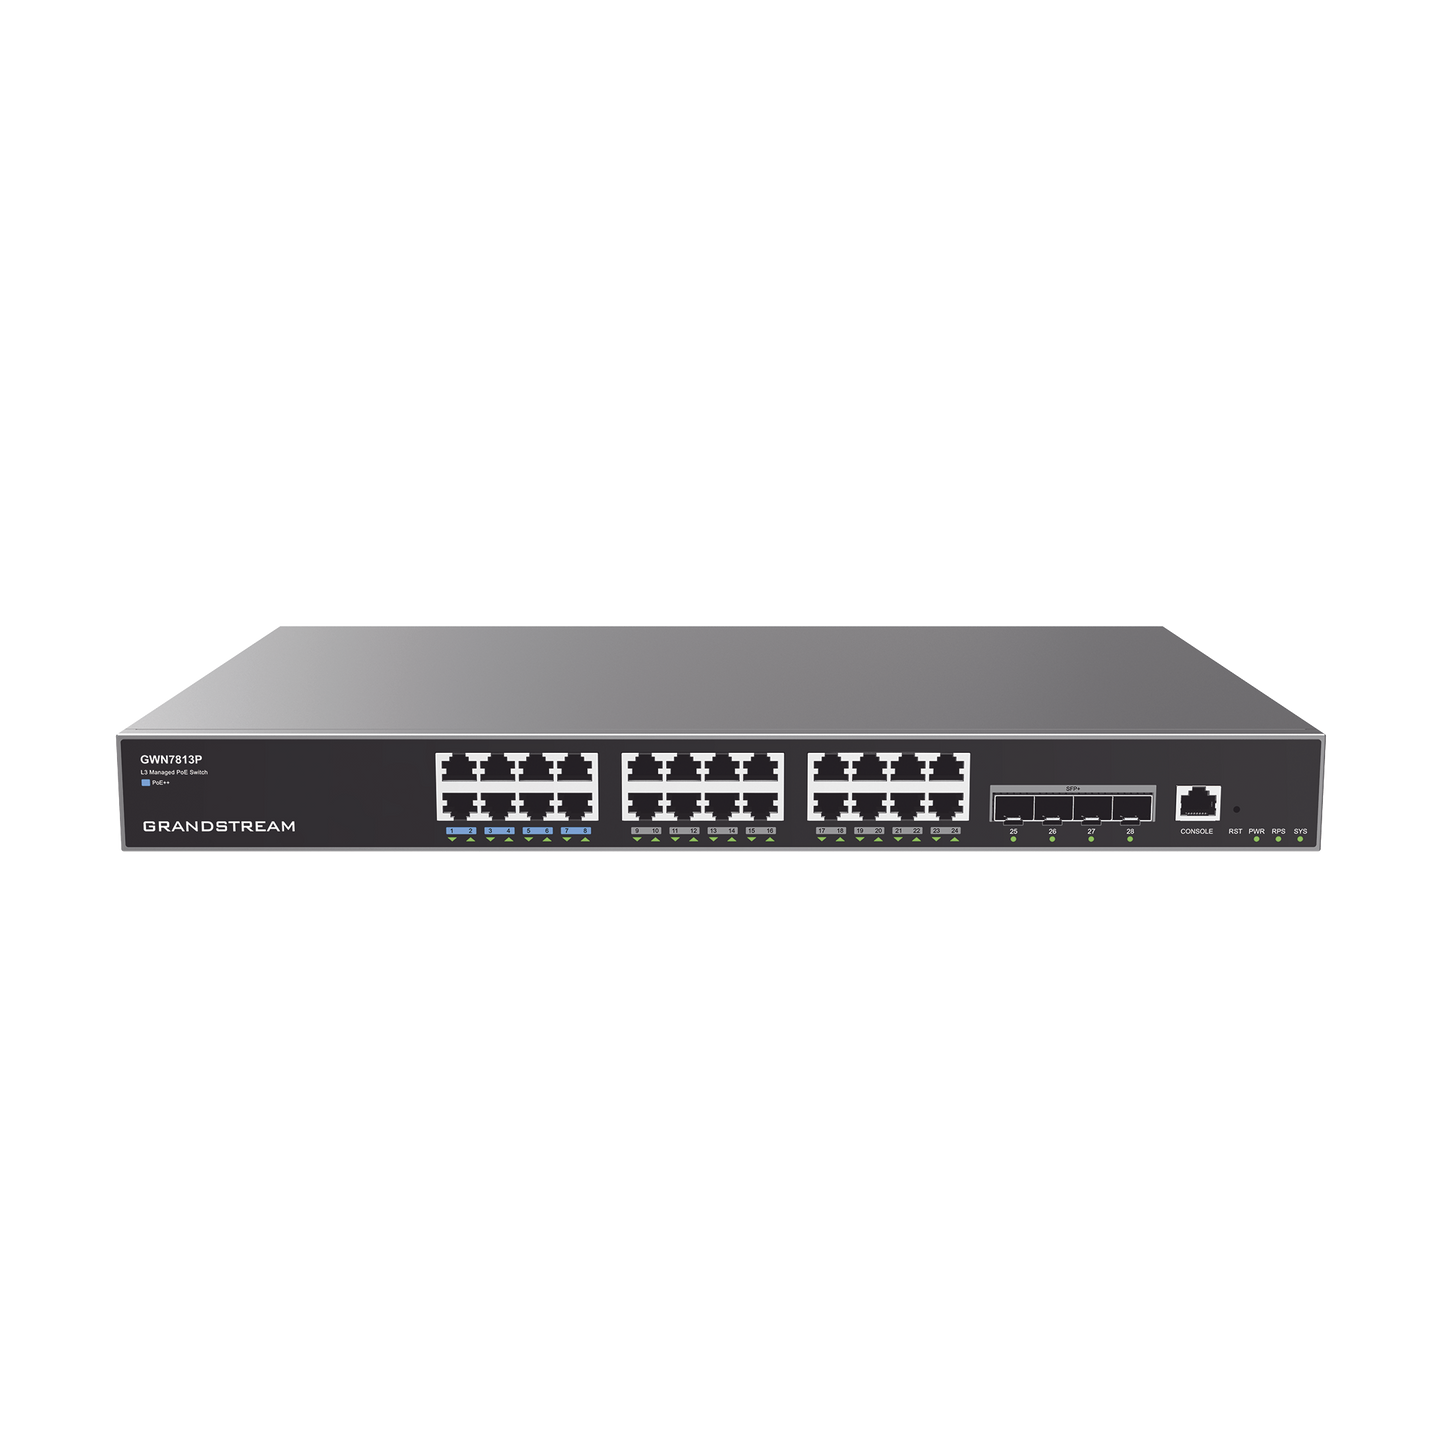 Managed Gigabit PoE+ Switch / 24 ports 10/100/1000 Mbps + 4 SFP Uplink Ports / Up to 360W / Compatible with GWN Cloud.